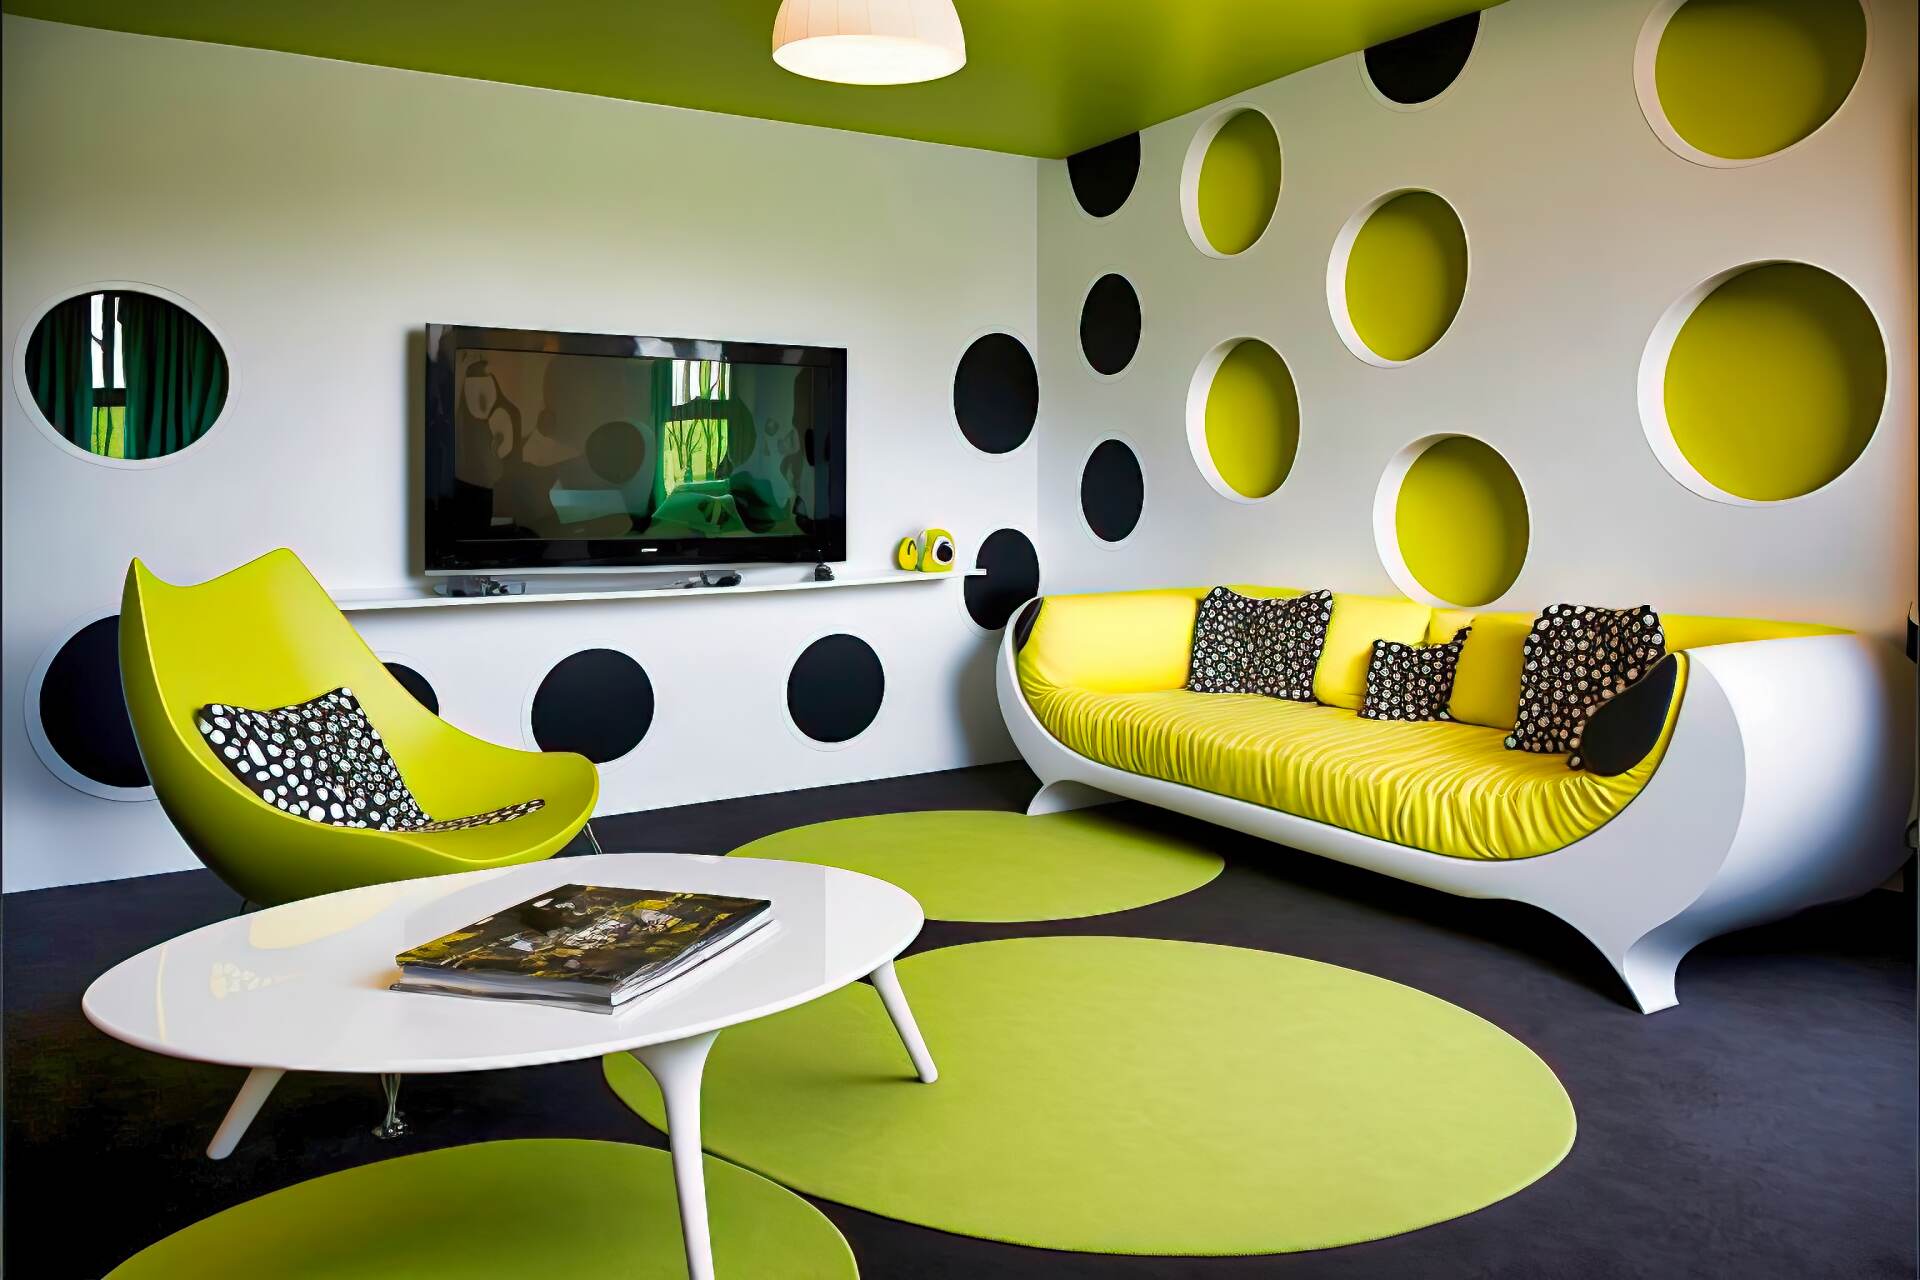 A Bold And Fun Living Room With A Futuristic Feel. The Walls Are Painted A Bright Green, With A Large, Flat-Screen Tv Mounted On One Wall. A White, Modular Sofa Is Made Up Of Chaise Lounges And Armchairs. A Bright Yellow Coffee Table And White Accent Chair Complete The Look. A Black And White Patterned Rug Adds Texture And Colour. A Wall Of Windows Floods The Room With Natural Light.